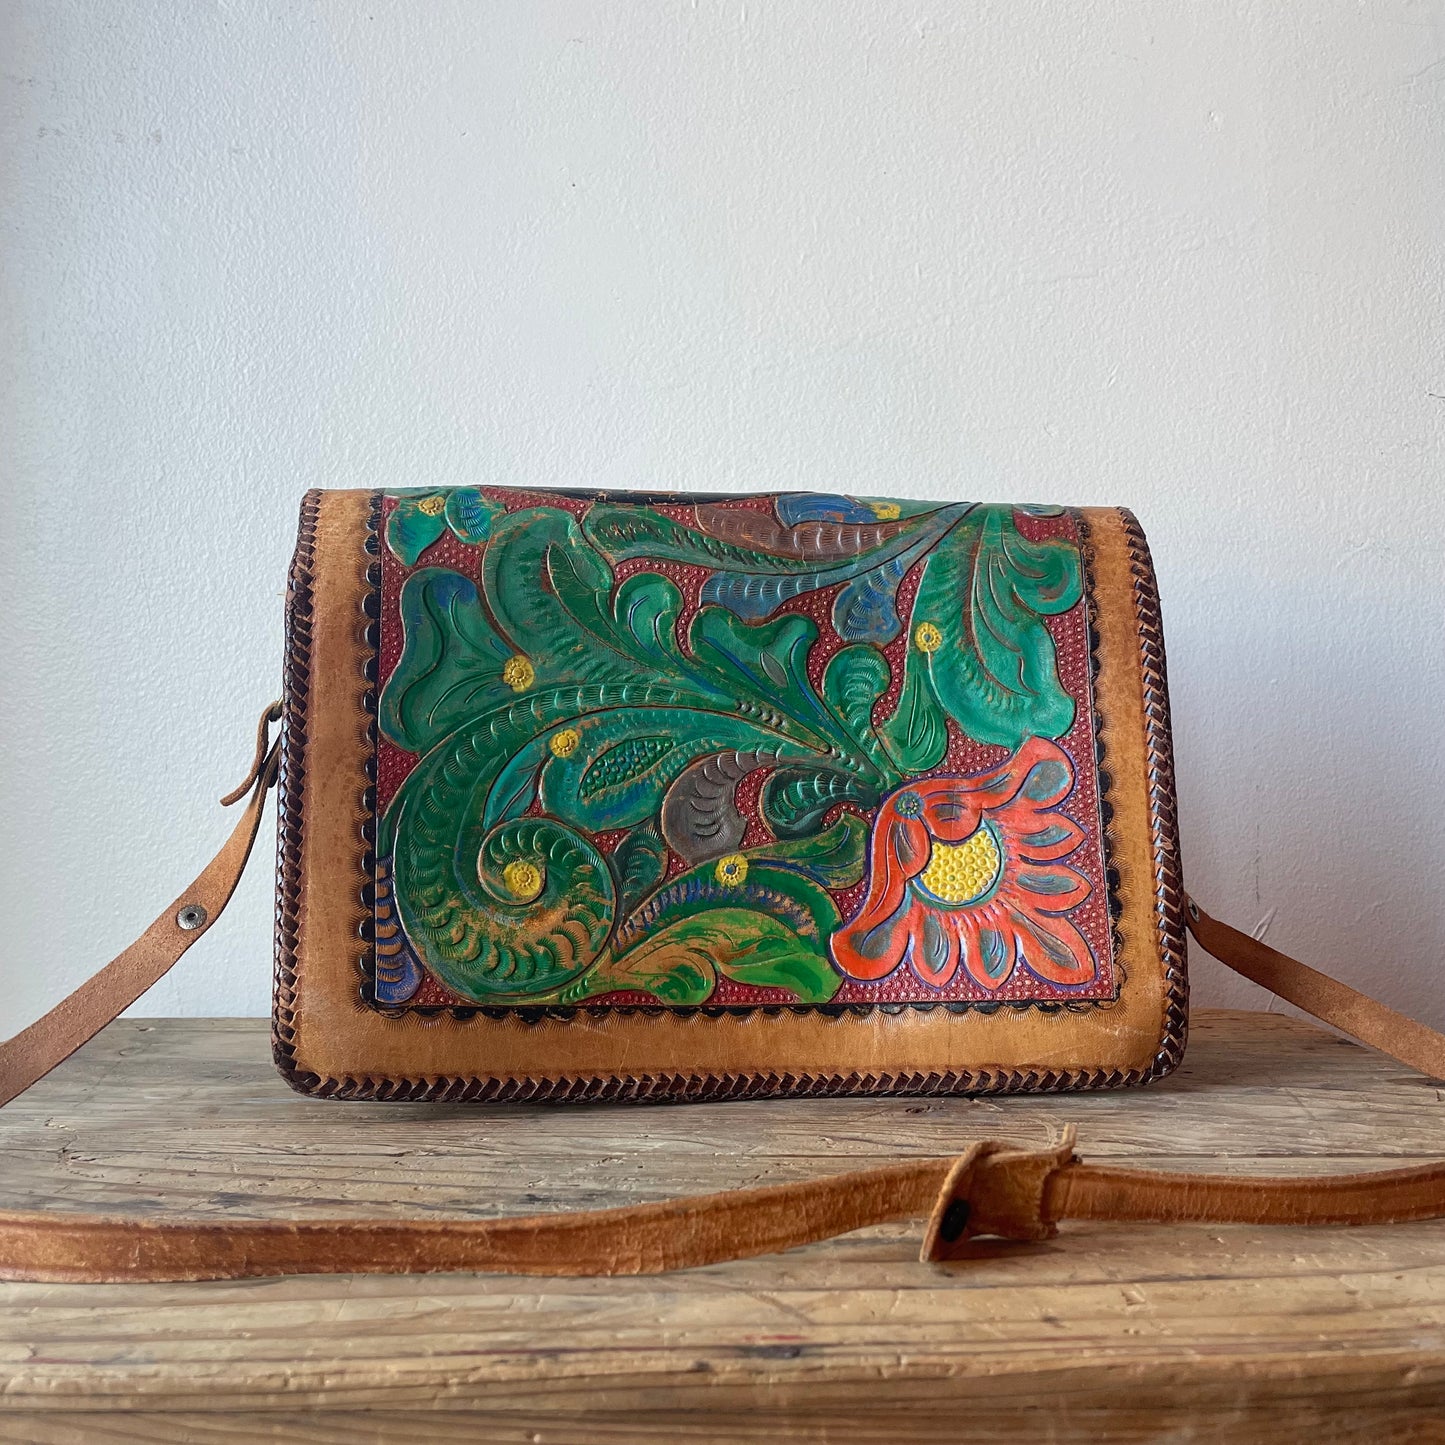 VTG Tooled Leather Bag with Painted Horse